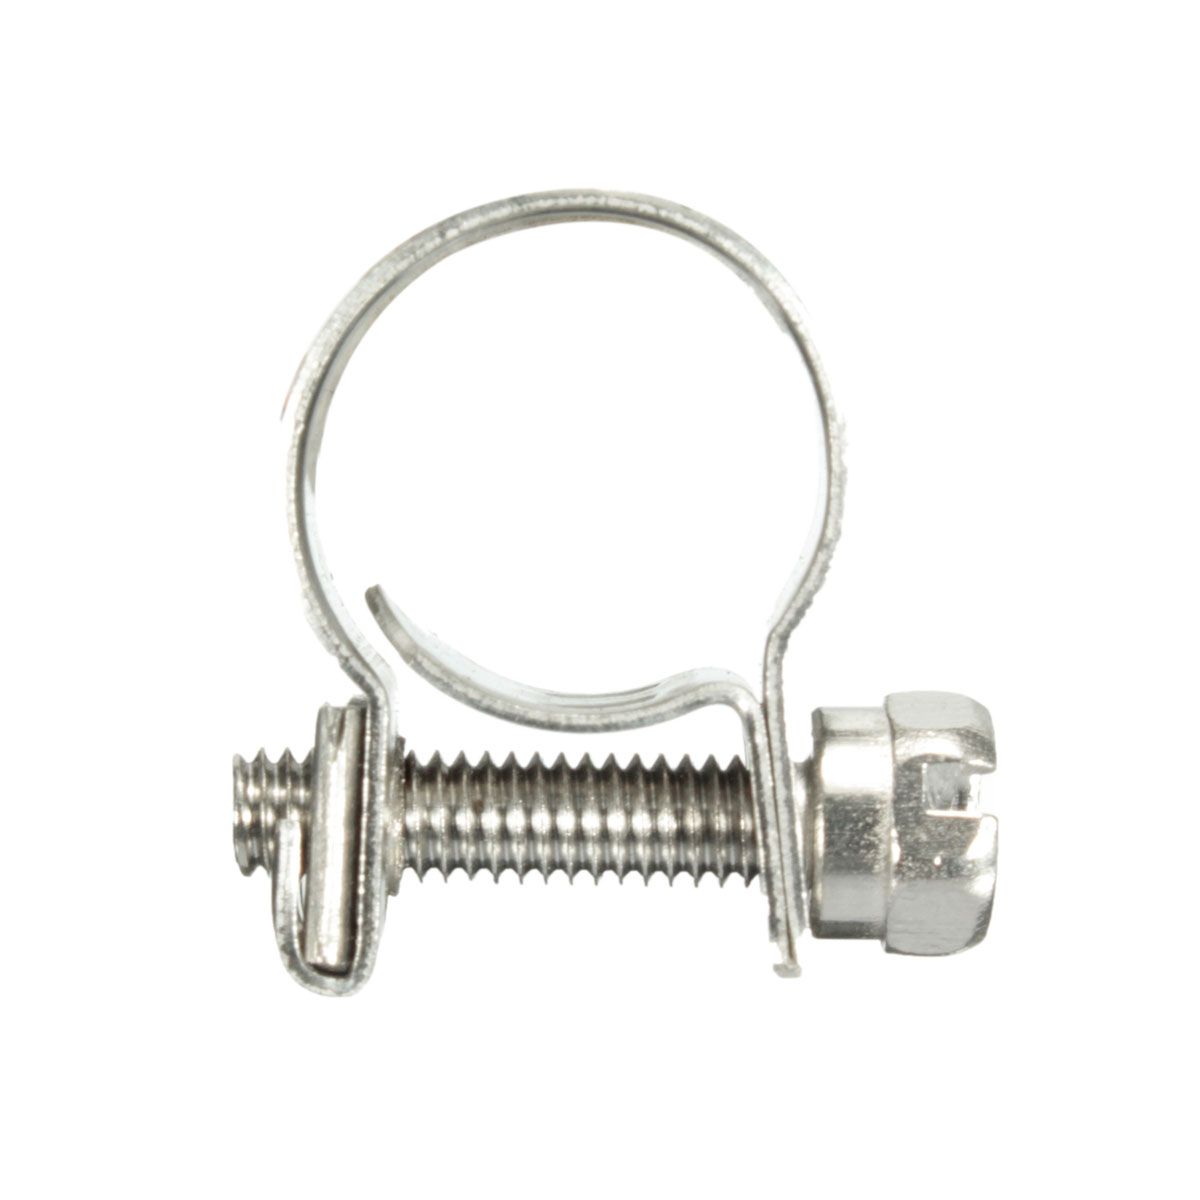 6mm-13mm-Stainless-Steel-Mini-Hose-Clip-Clamp-for-Fuel-Line-Pipe-Petrol-Pipe-1307209